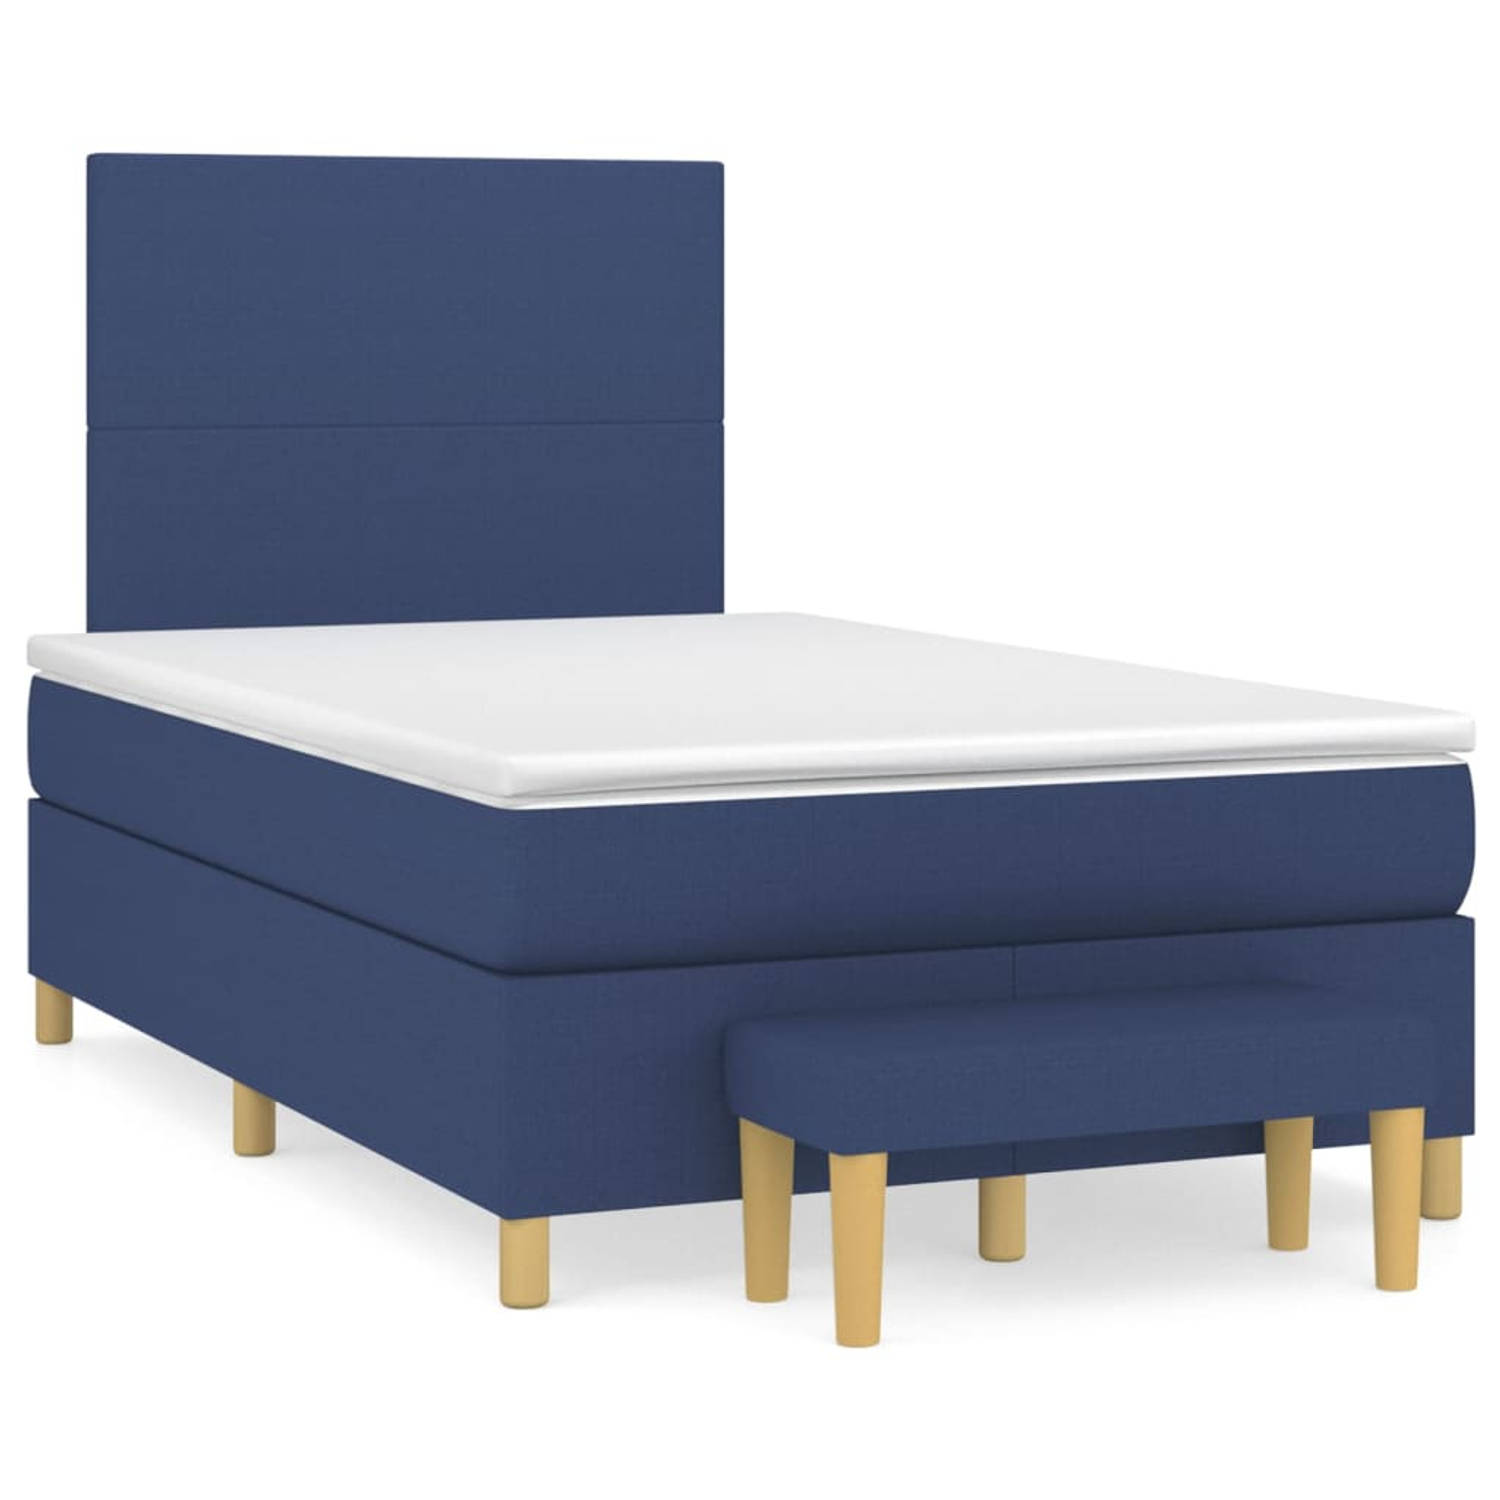 The Living Store Boxspring met matras stof blauw 120x200 cm - Boxspring - Boxsprings - Pocketveringbed - Bed - Slaapmeubel - Boxspringbed - Boxspring Bed - Eenpersoonsbed - Bed Met